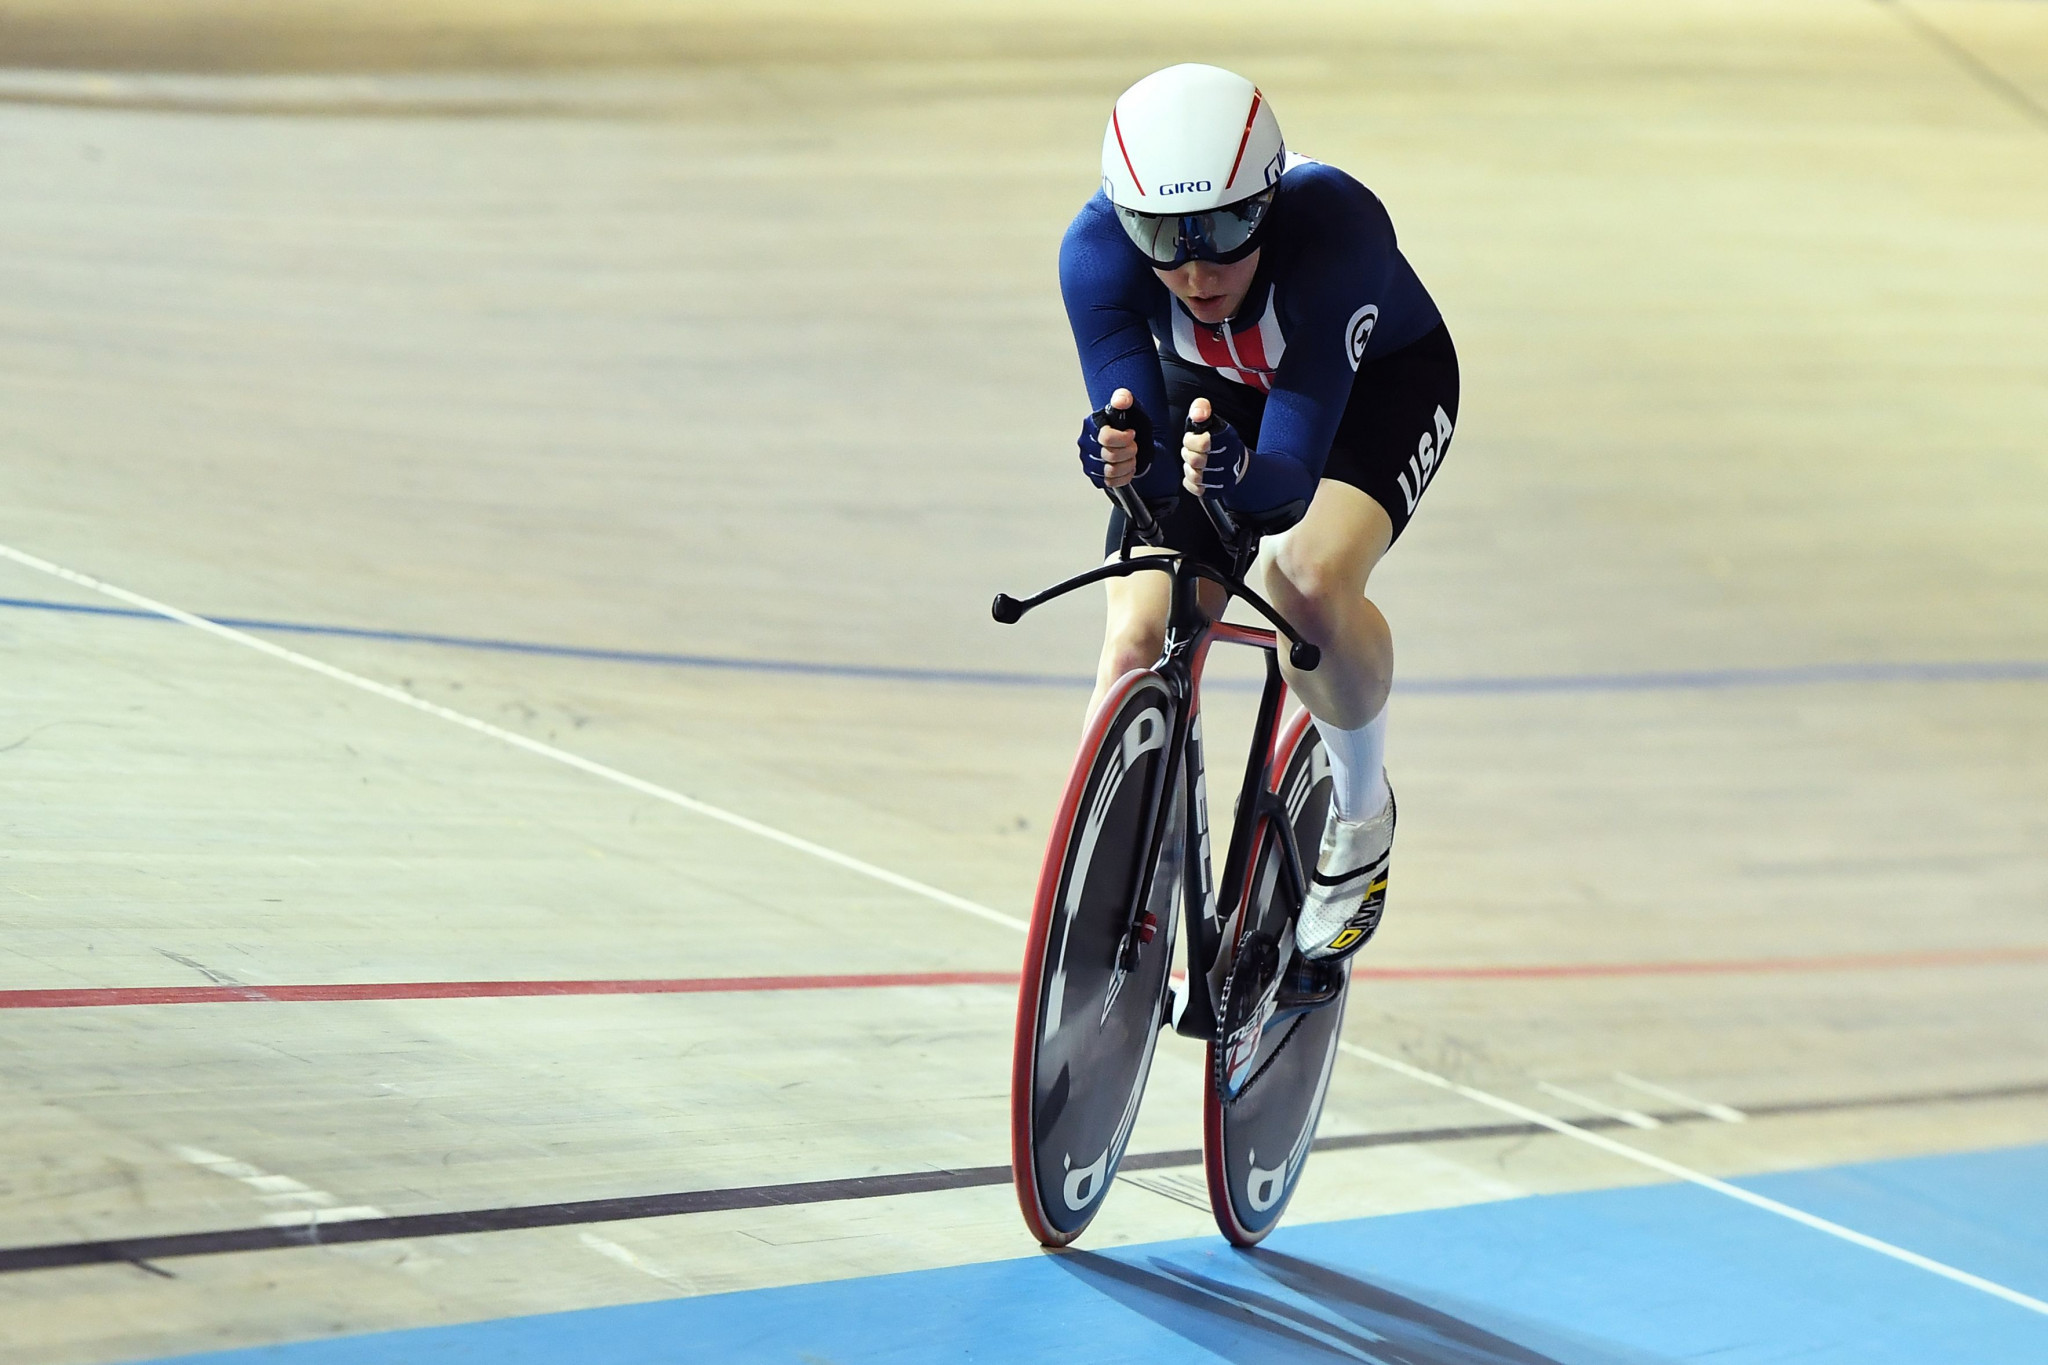 Kelly Catlin won three world titles and an Olympic silver medal ©Getty Images